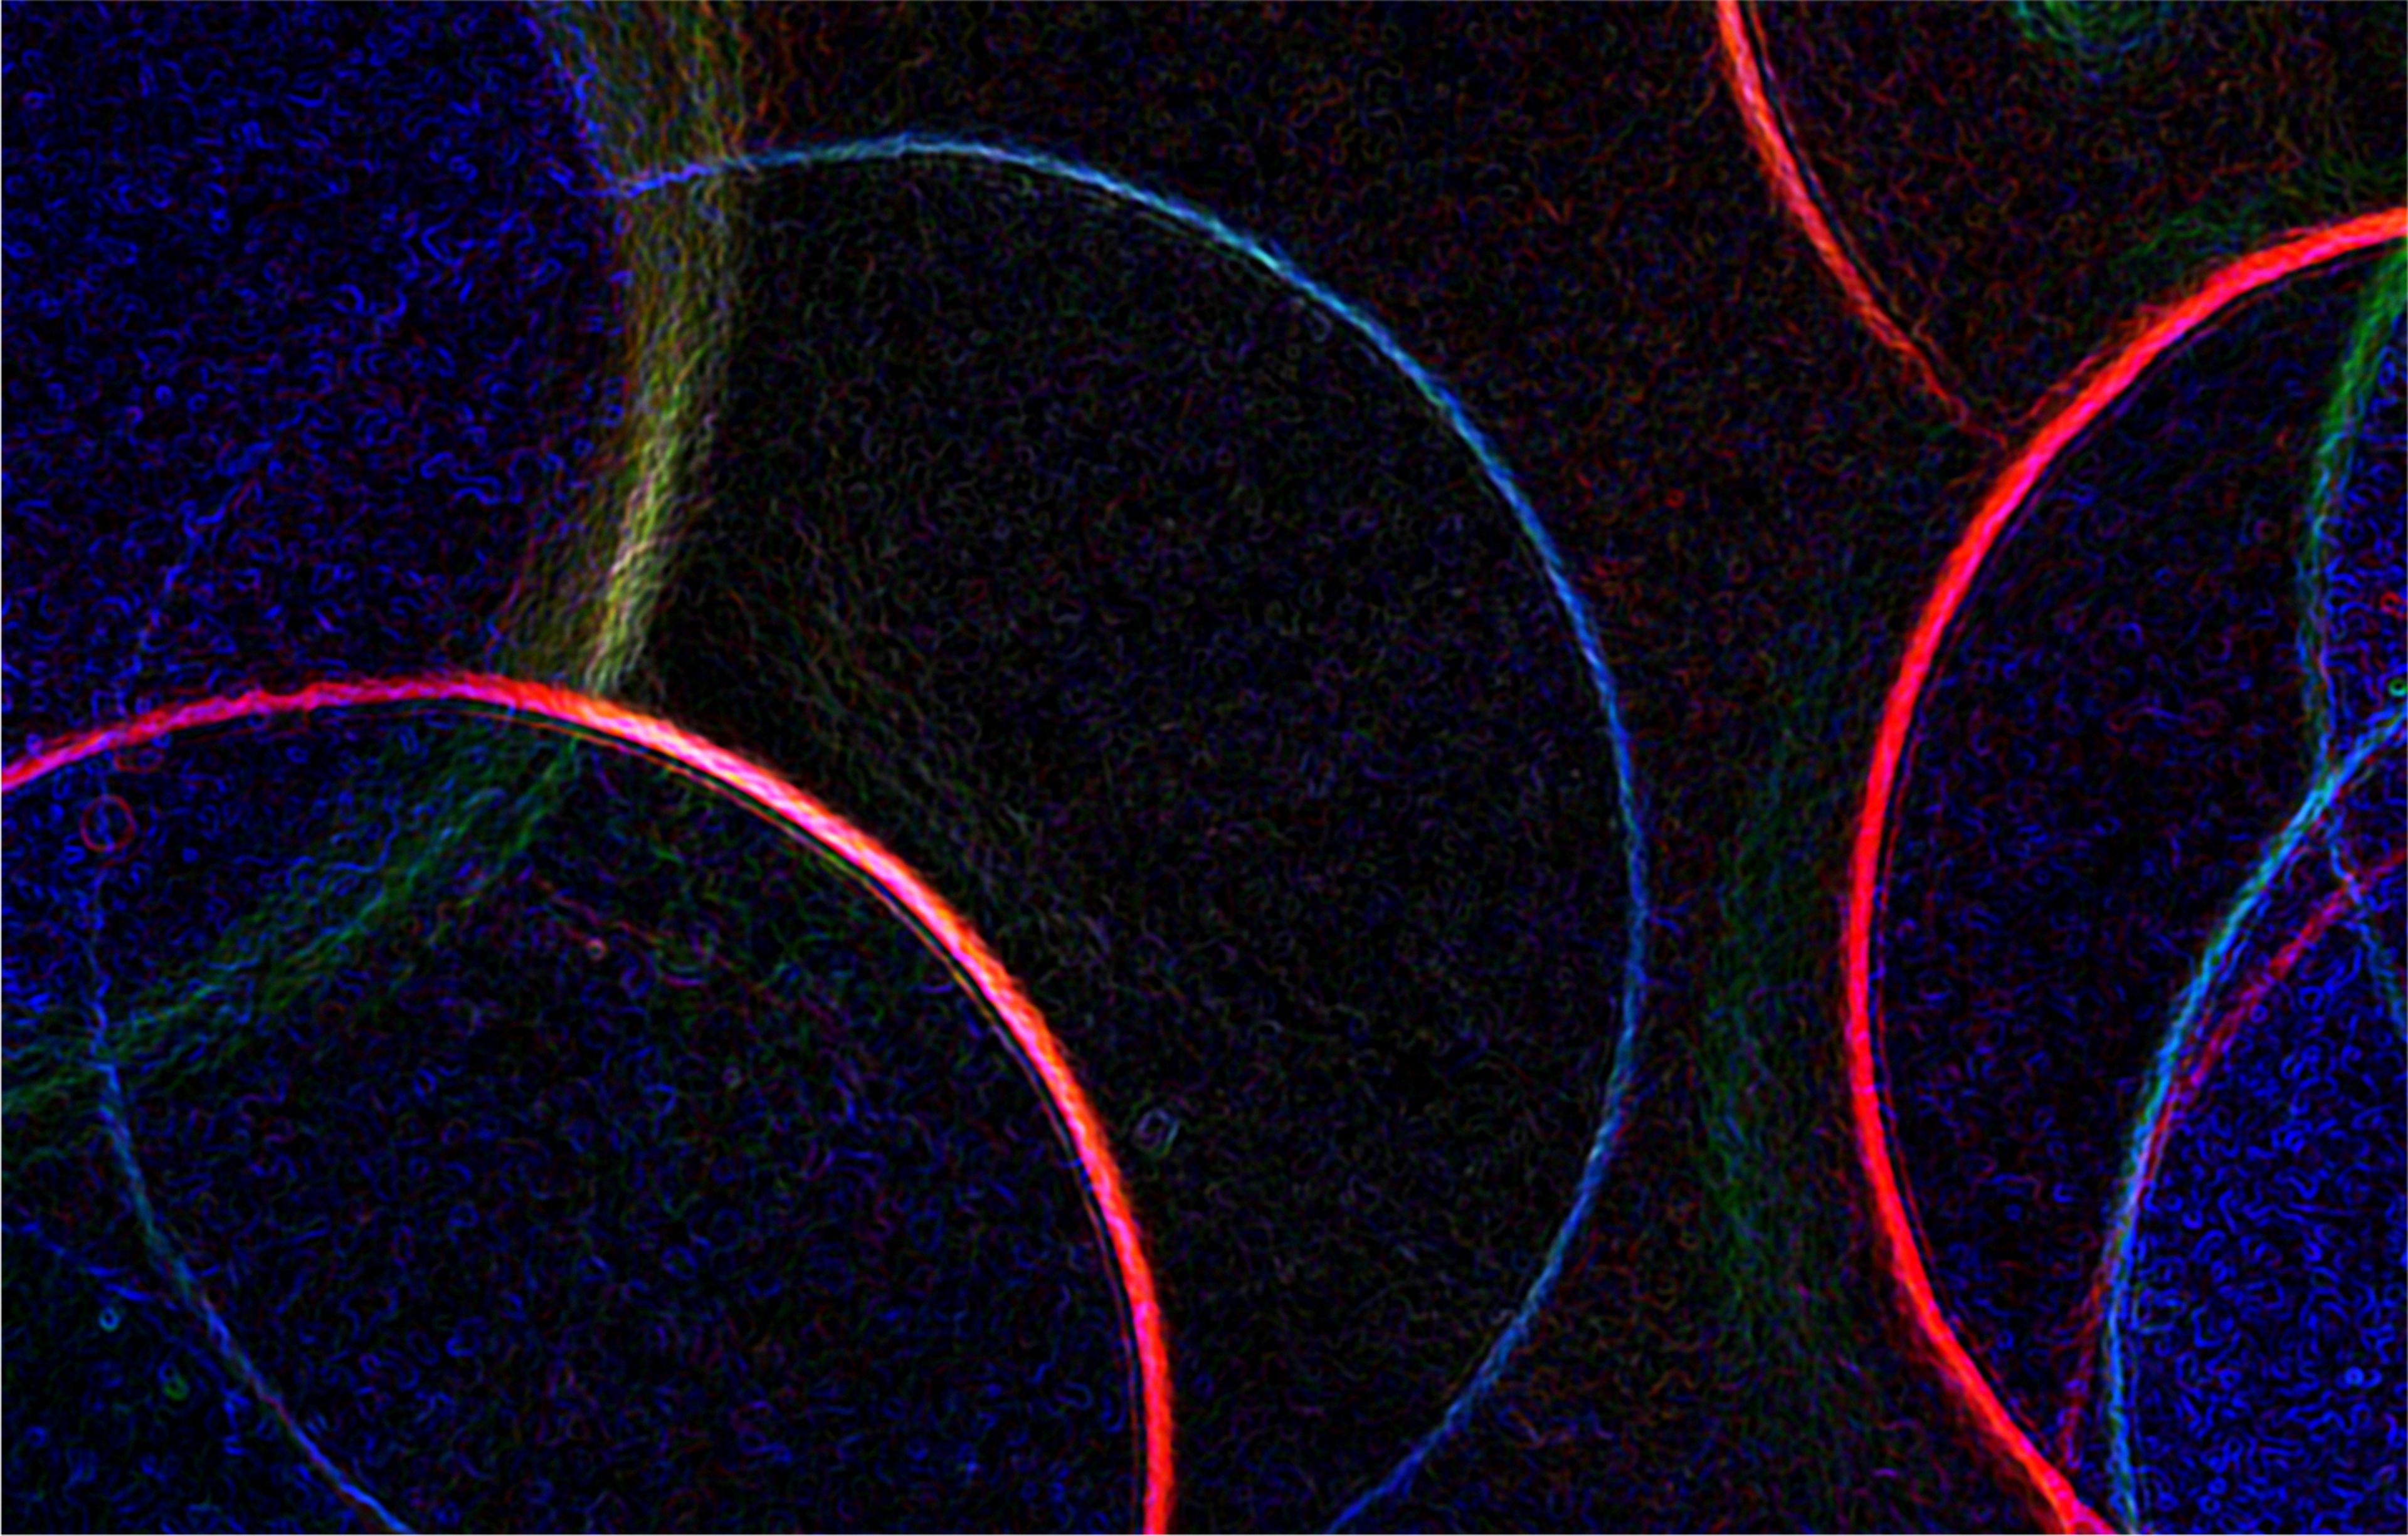 Lit rings in different colors with a dark background.